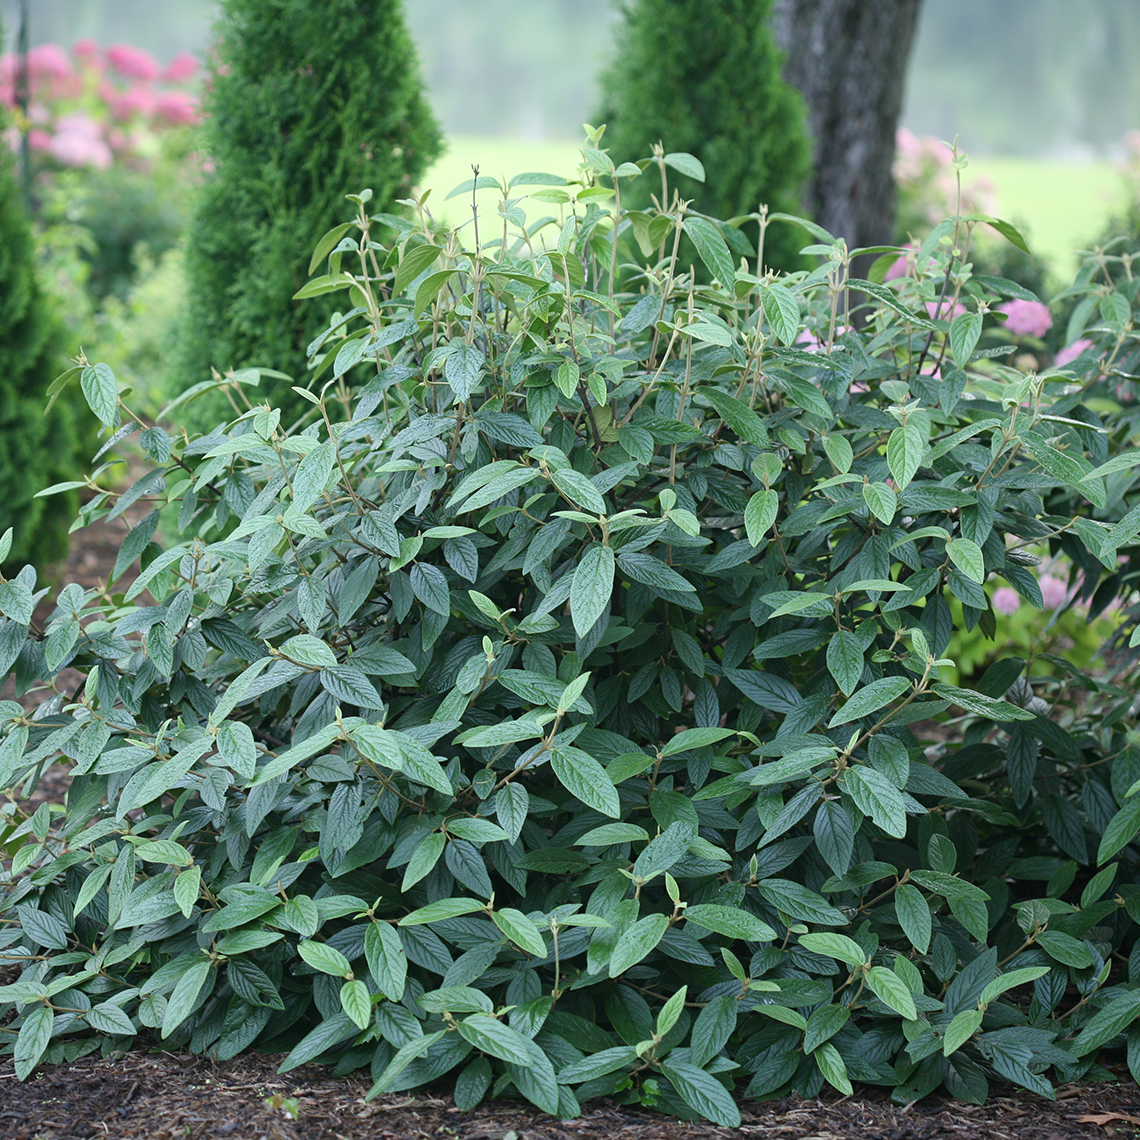 Emerald Envy viburnum in a landscape showing its mounded habit and dark green evergreen foliage